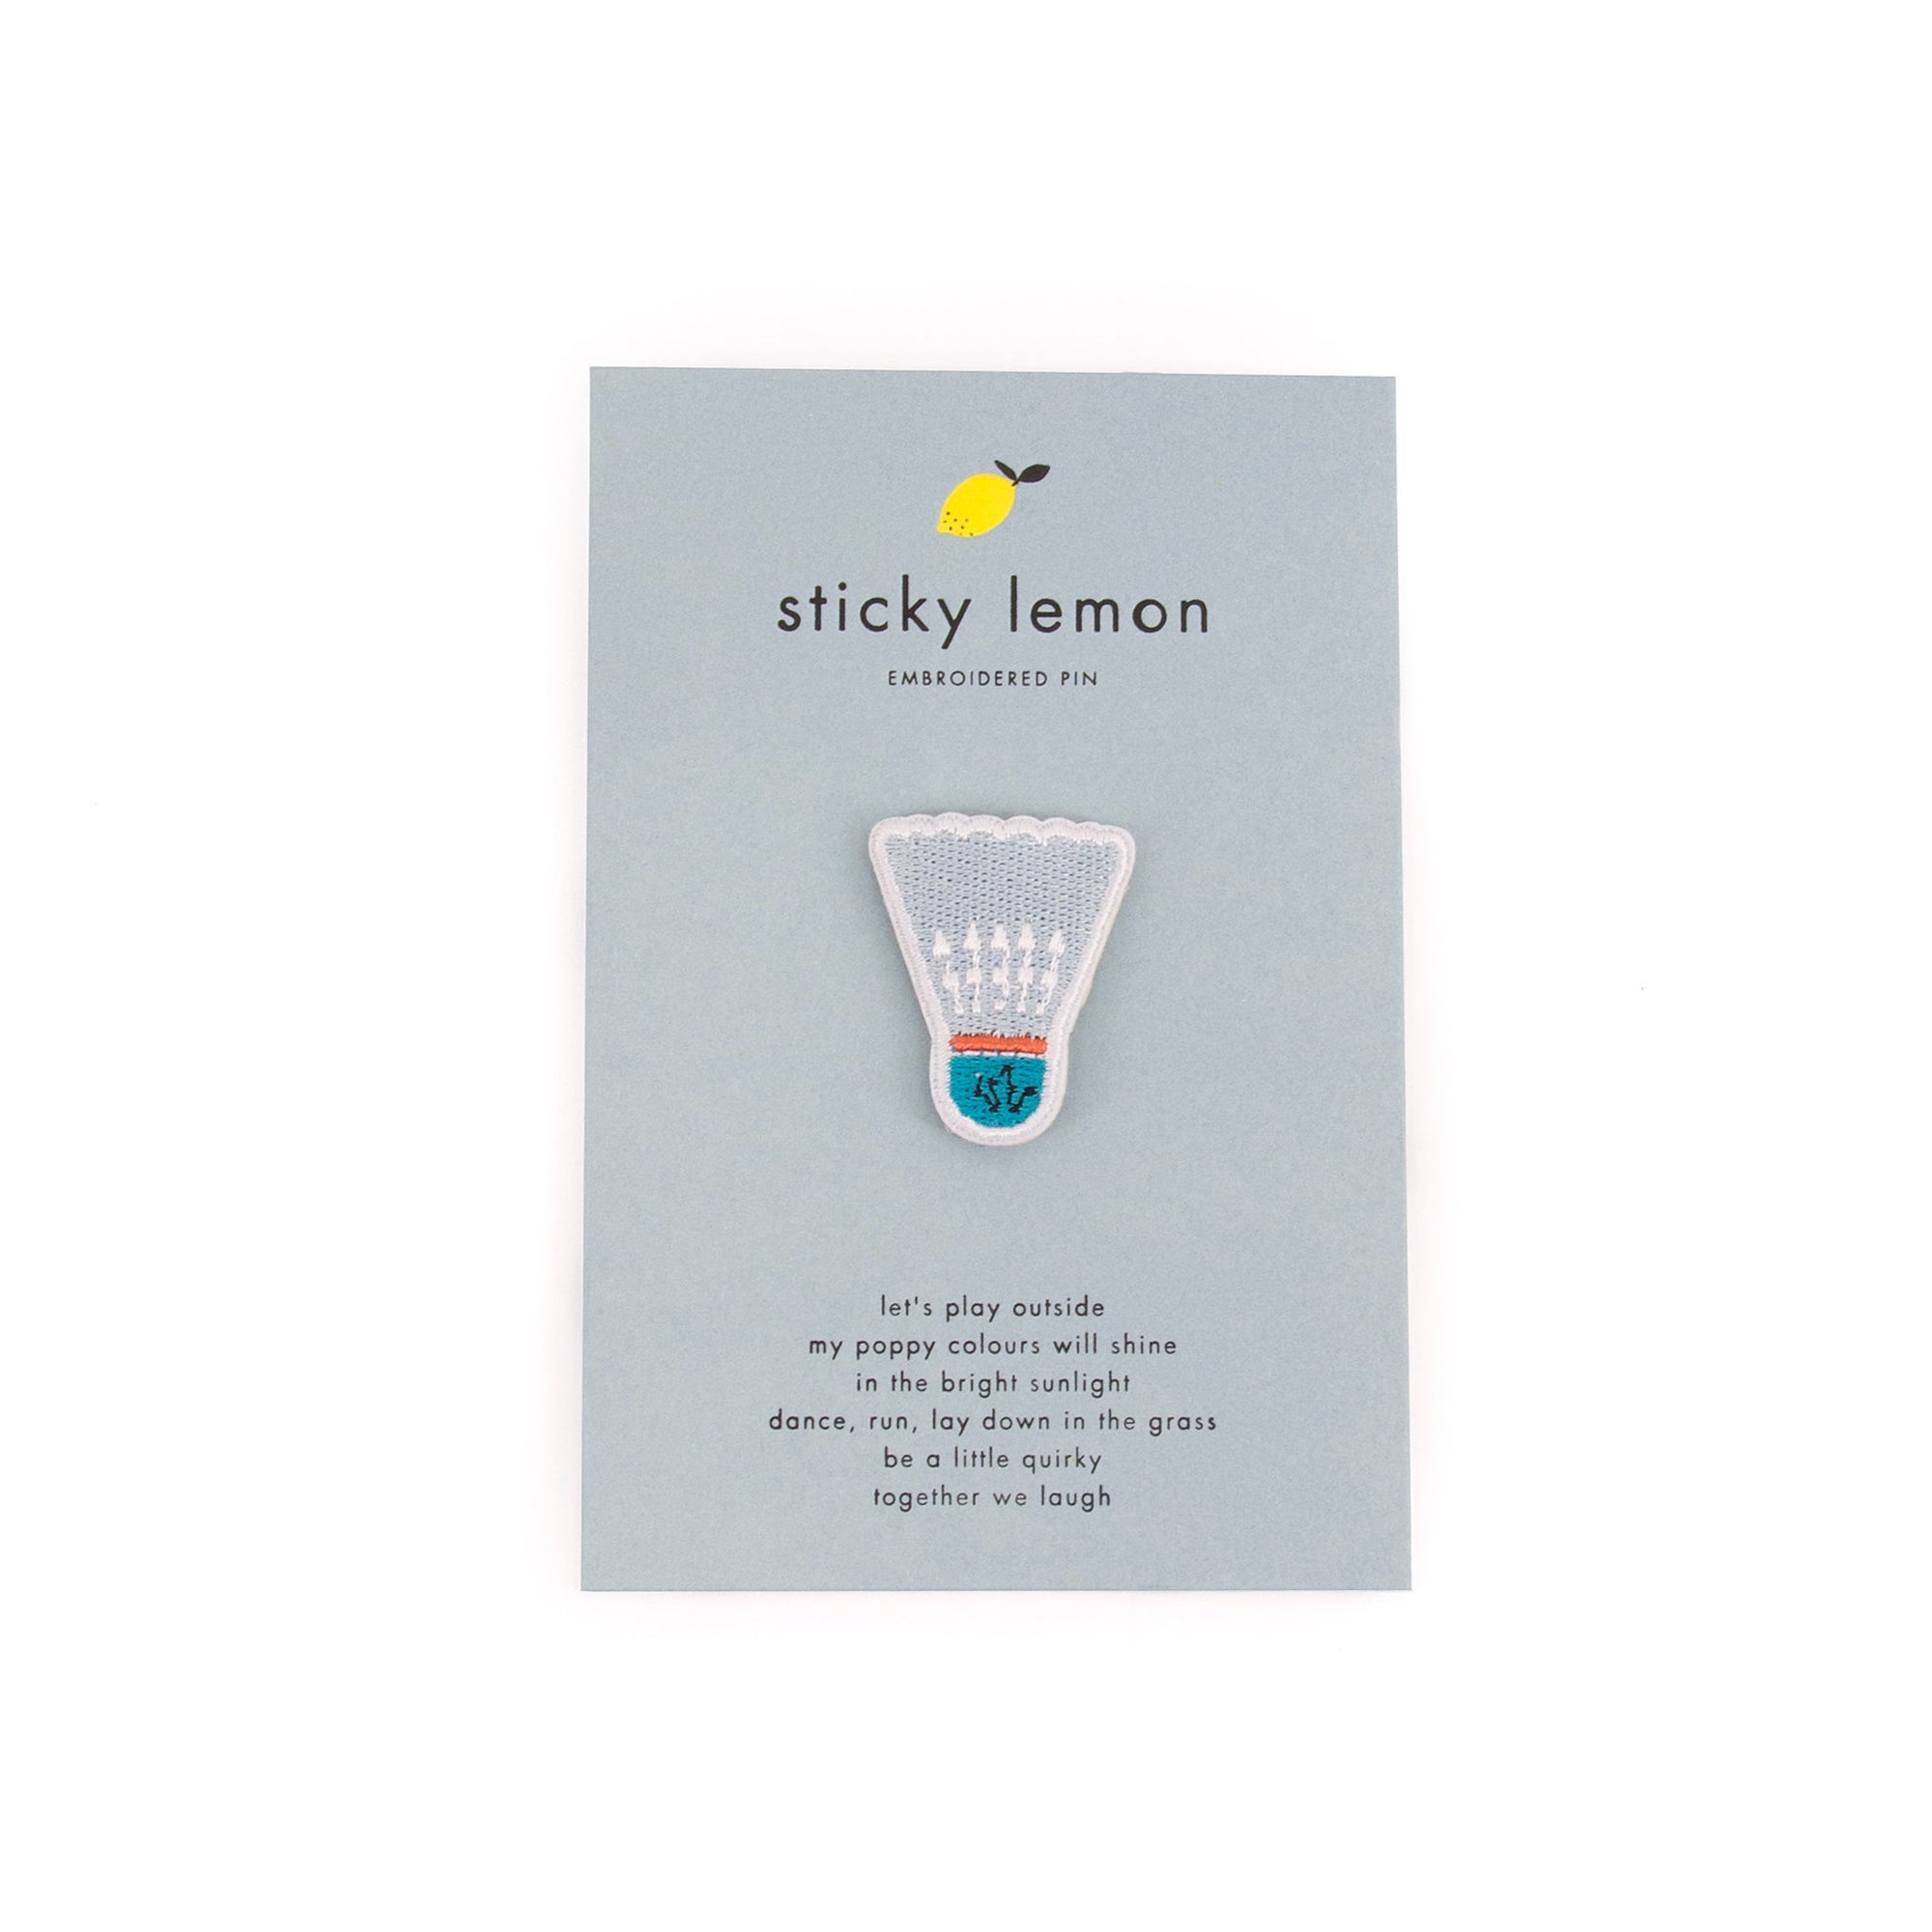 Sticky lemon Embroidered Pins Shuttle